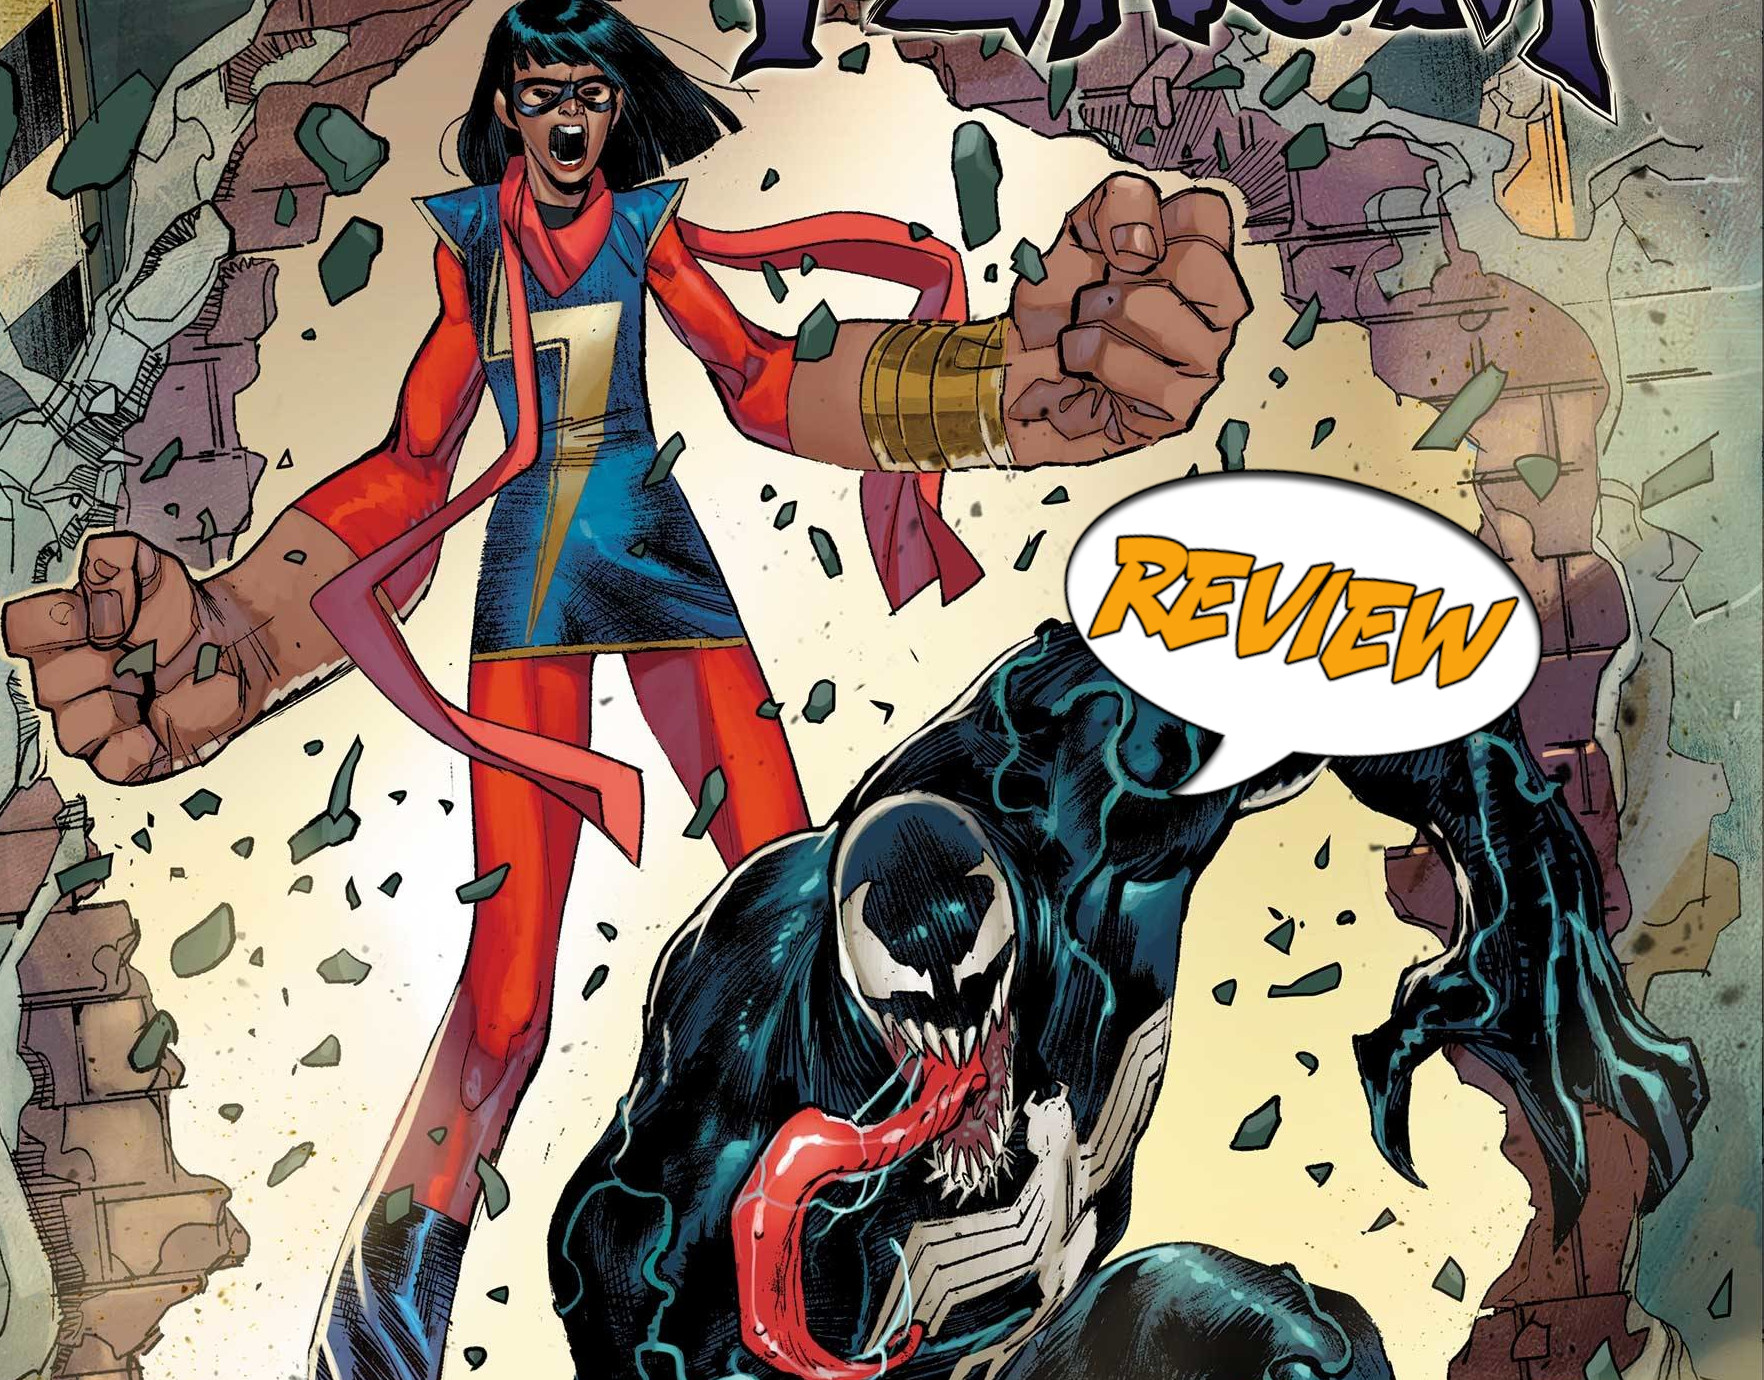 Ms. Marvel and Venom #1 Review